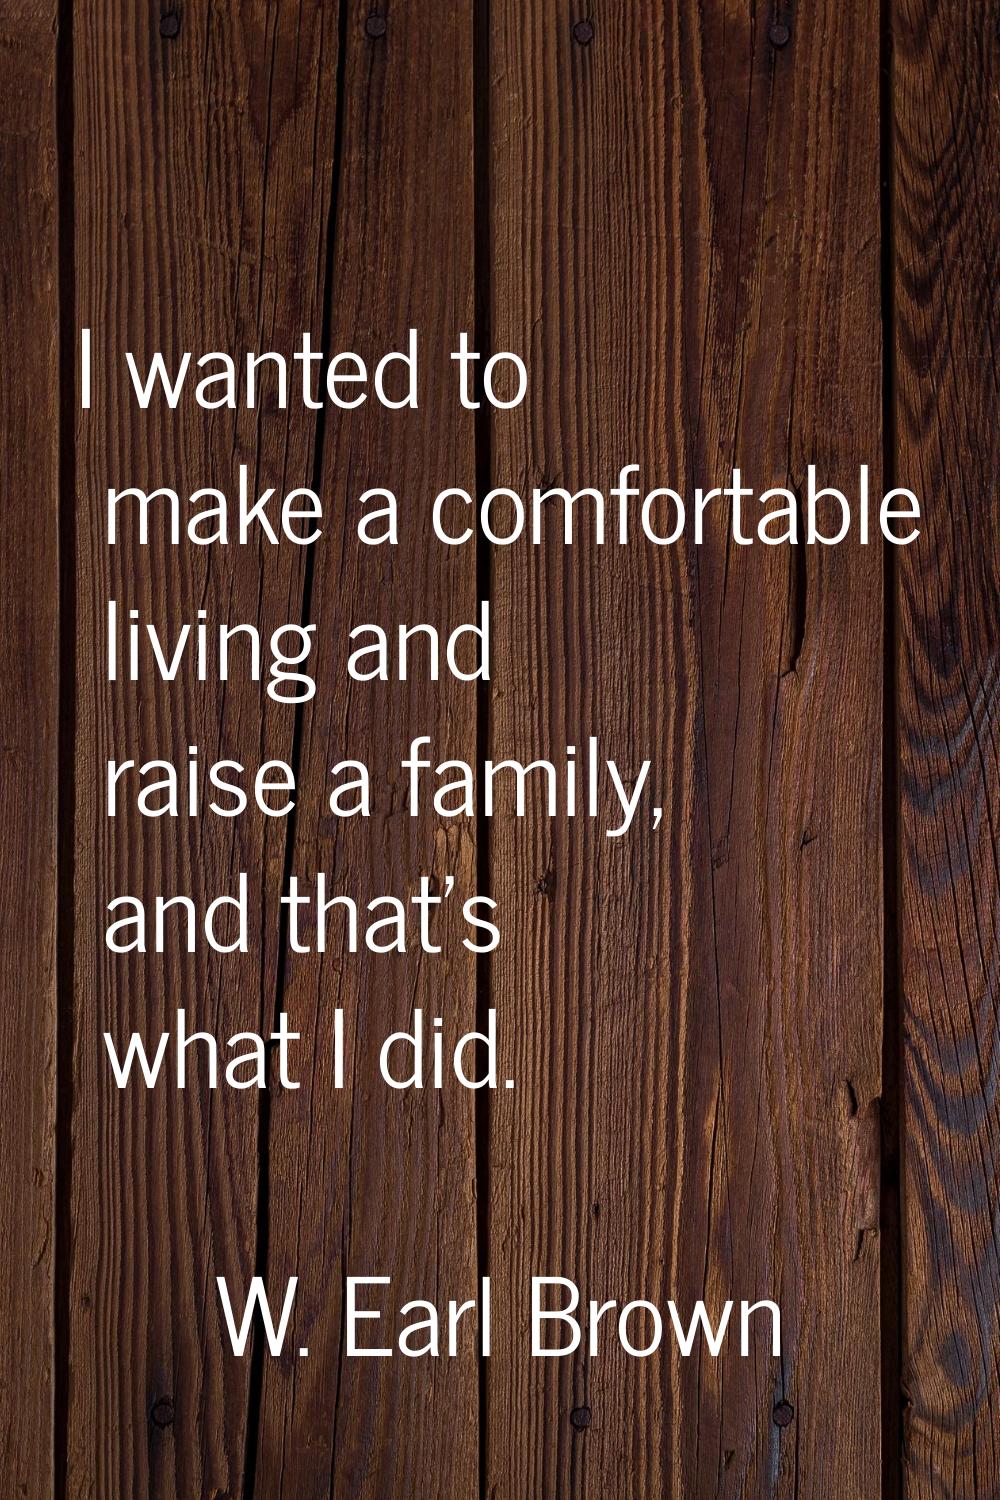 I wanted to make a comfortable living and raise a family, and that's what I did.